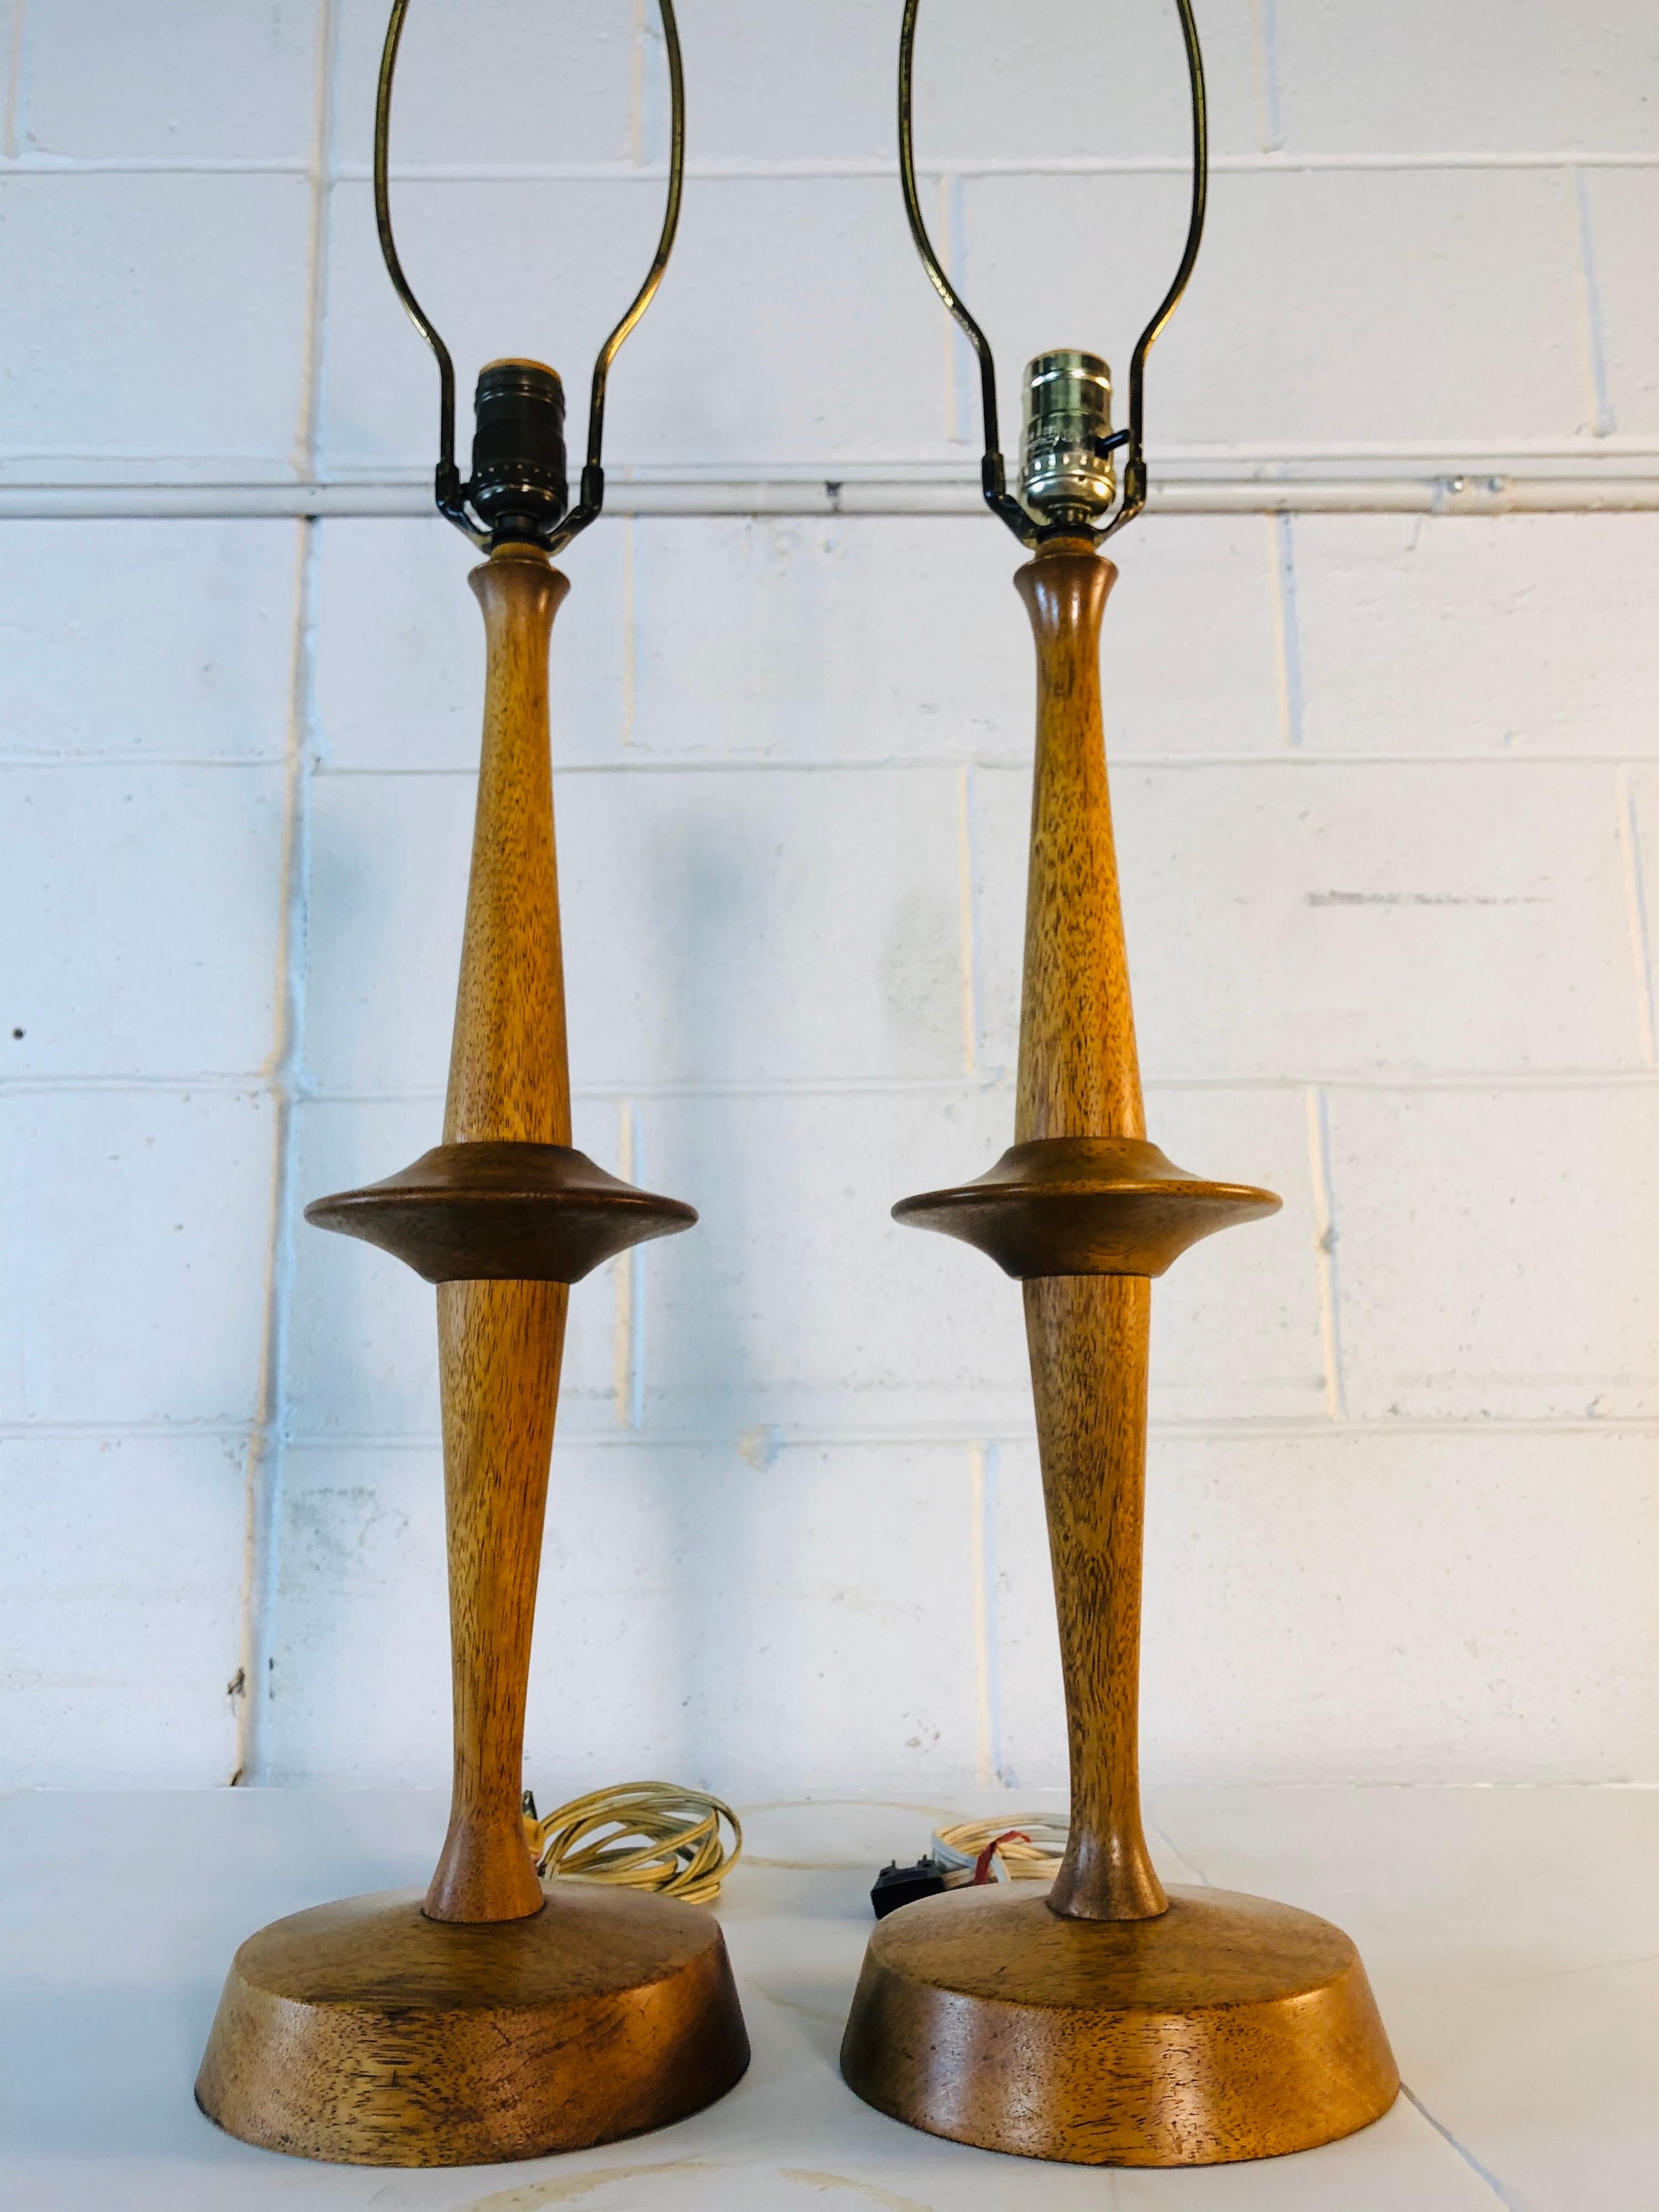 Vintage 1950s pair of Yasha Heifetz Atomic-style table lamps in bleached mahogany. These turned wood lamps have a great round atomic style accent in the middle of the lamp. Both lamps are in original condition and are signed. Socket, 22.5” height.